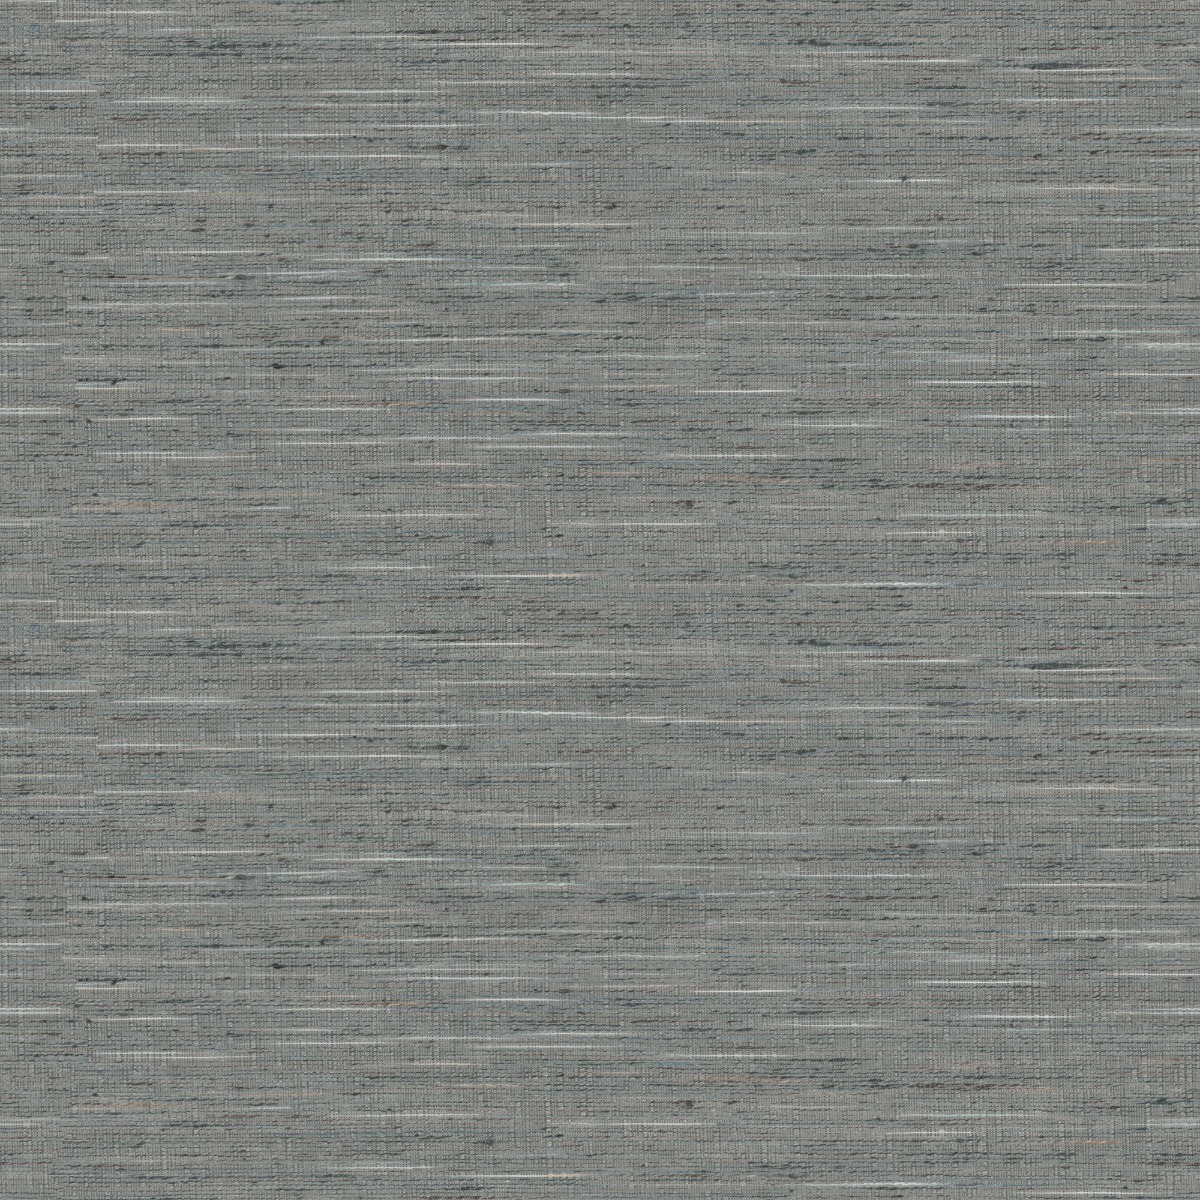 A seamless fabric texture with plain grey texture units arranged in a None pattern